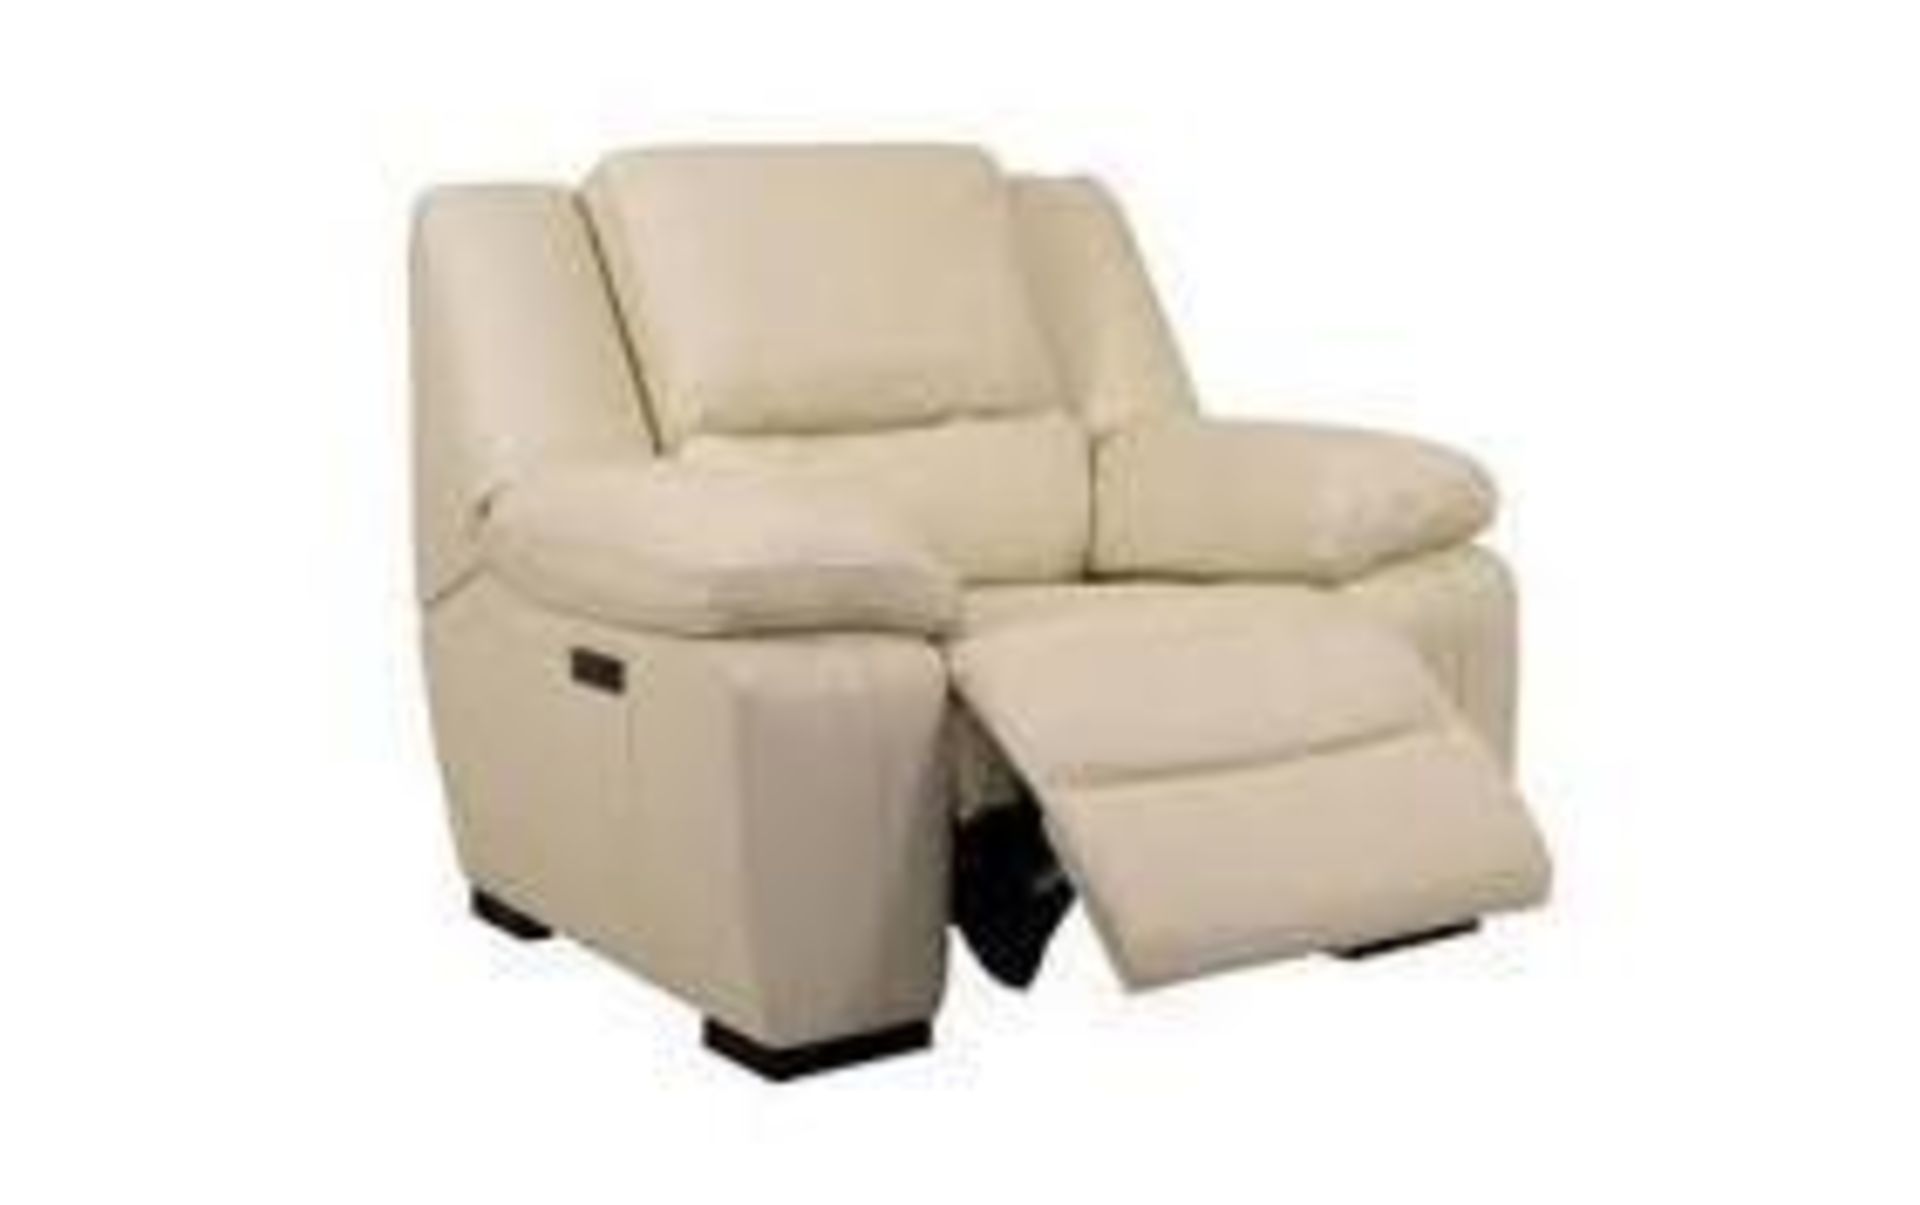 Brand new and boxed SCS Fallon 1 seater electric reclining armchair in Cream.